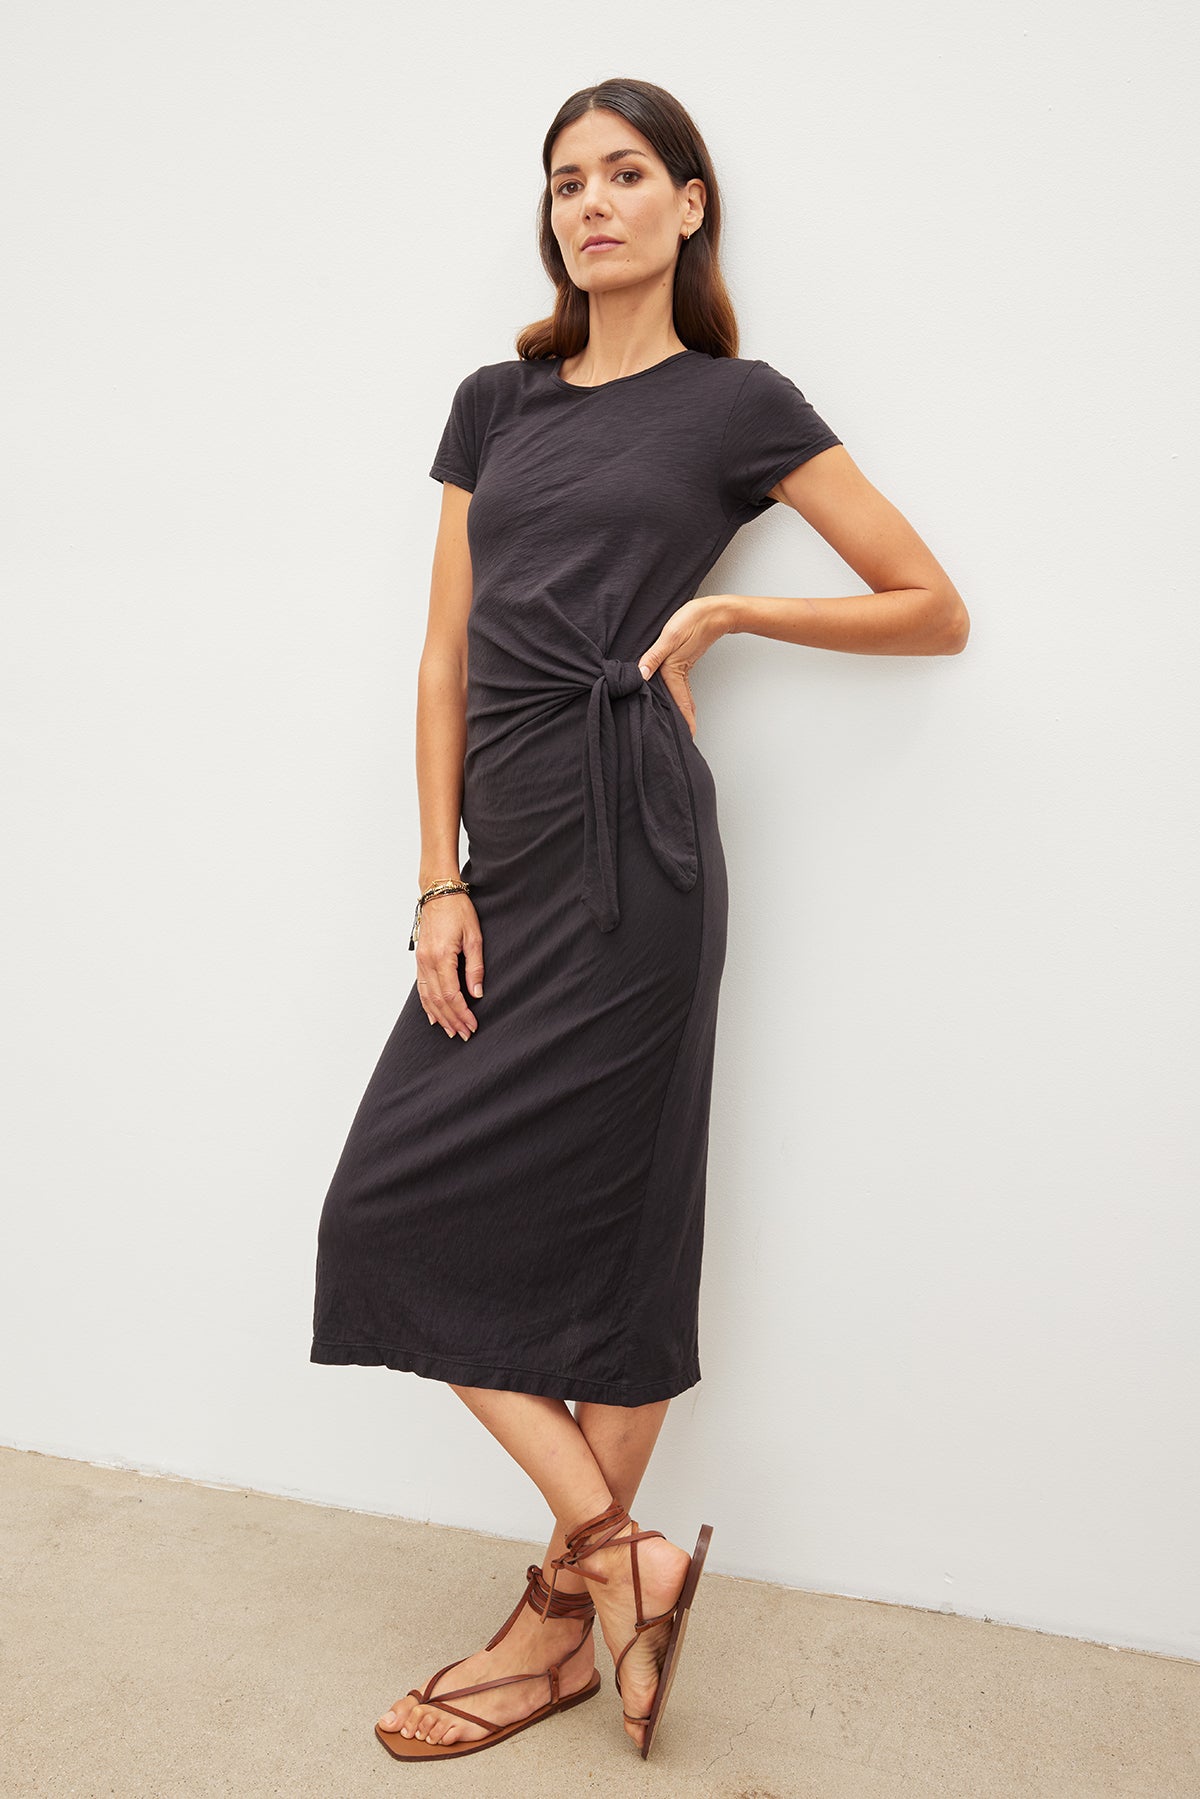 The model is wearing a Velvet by Graham & Spencer DARCY COTTON SLUB MIDI DRESS and sandals.-35955695911105